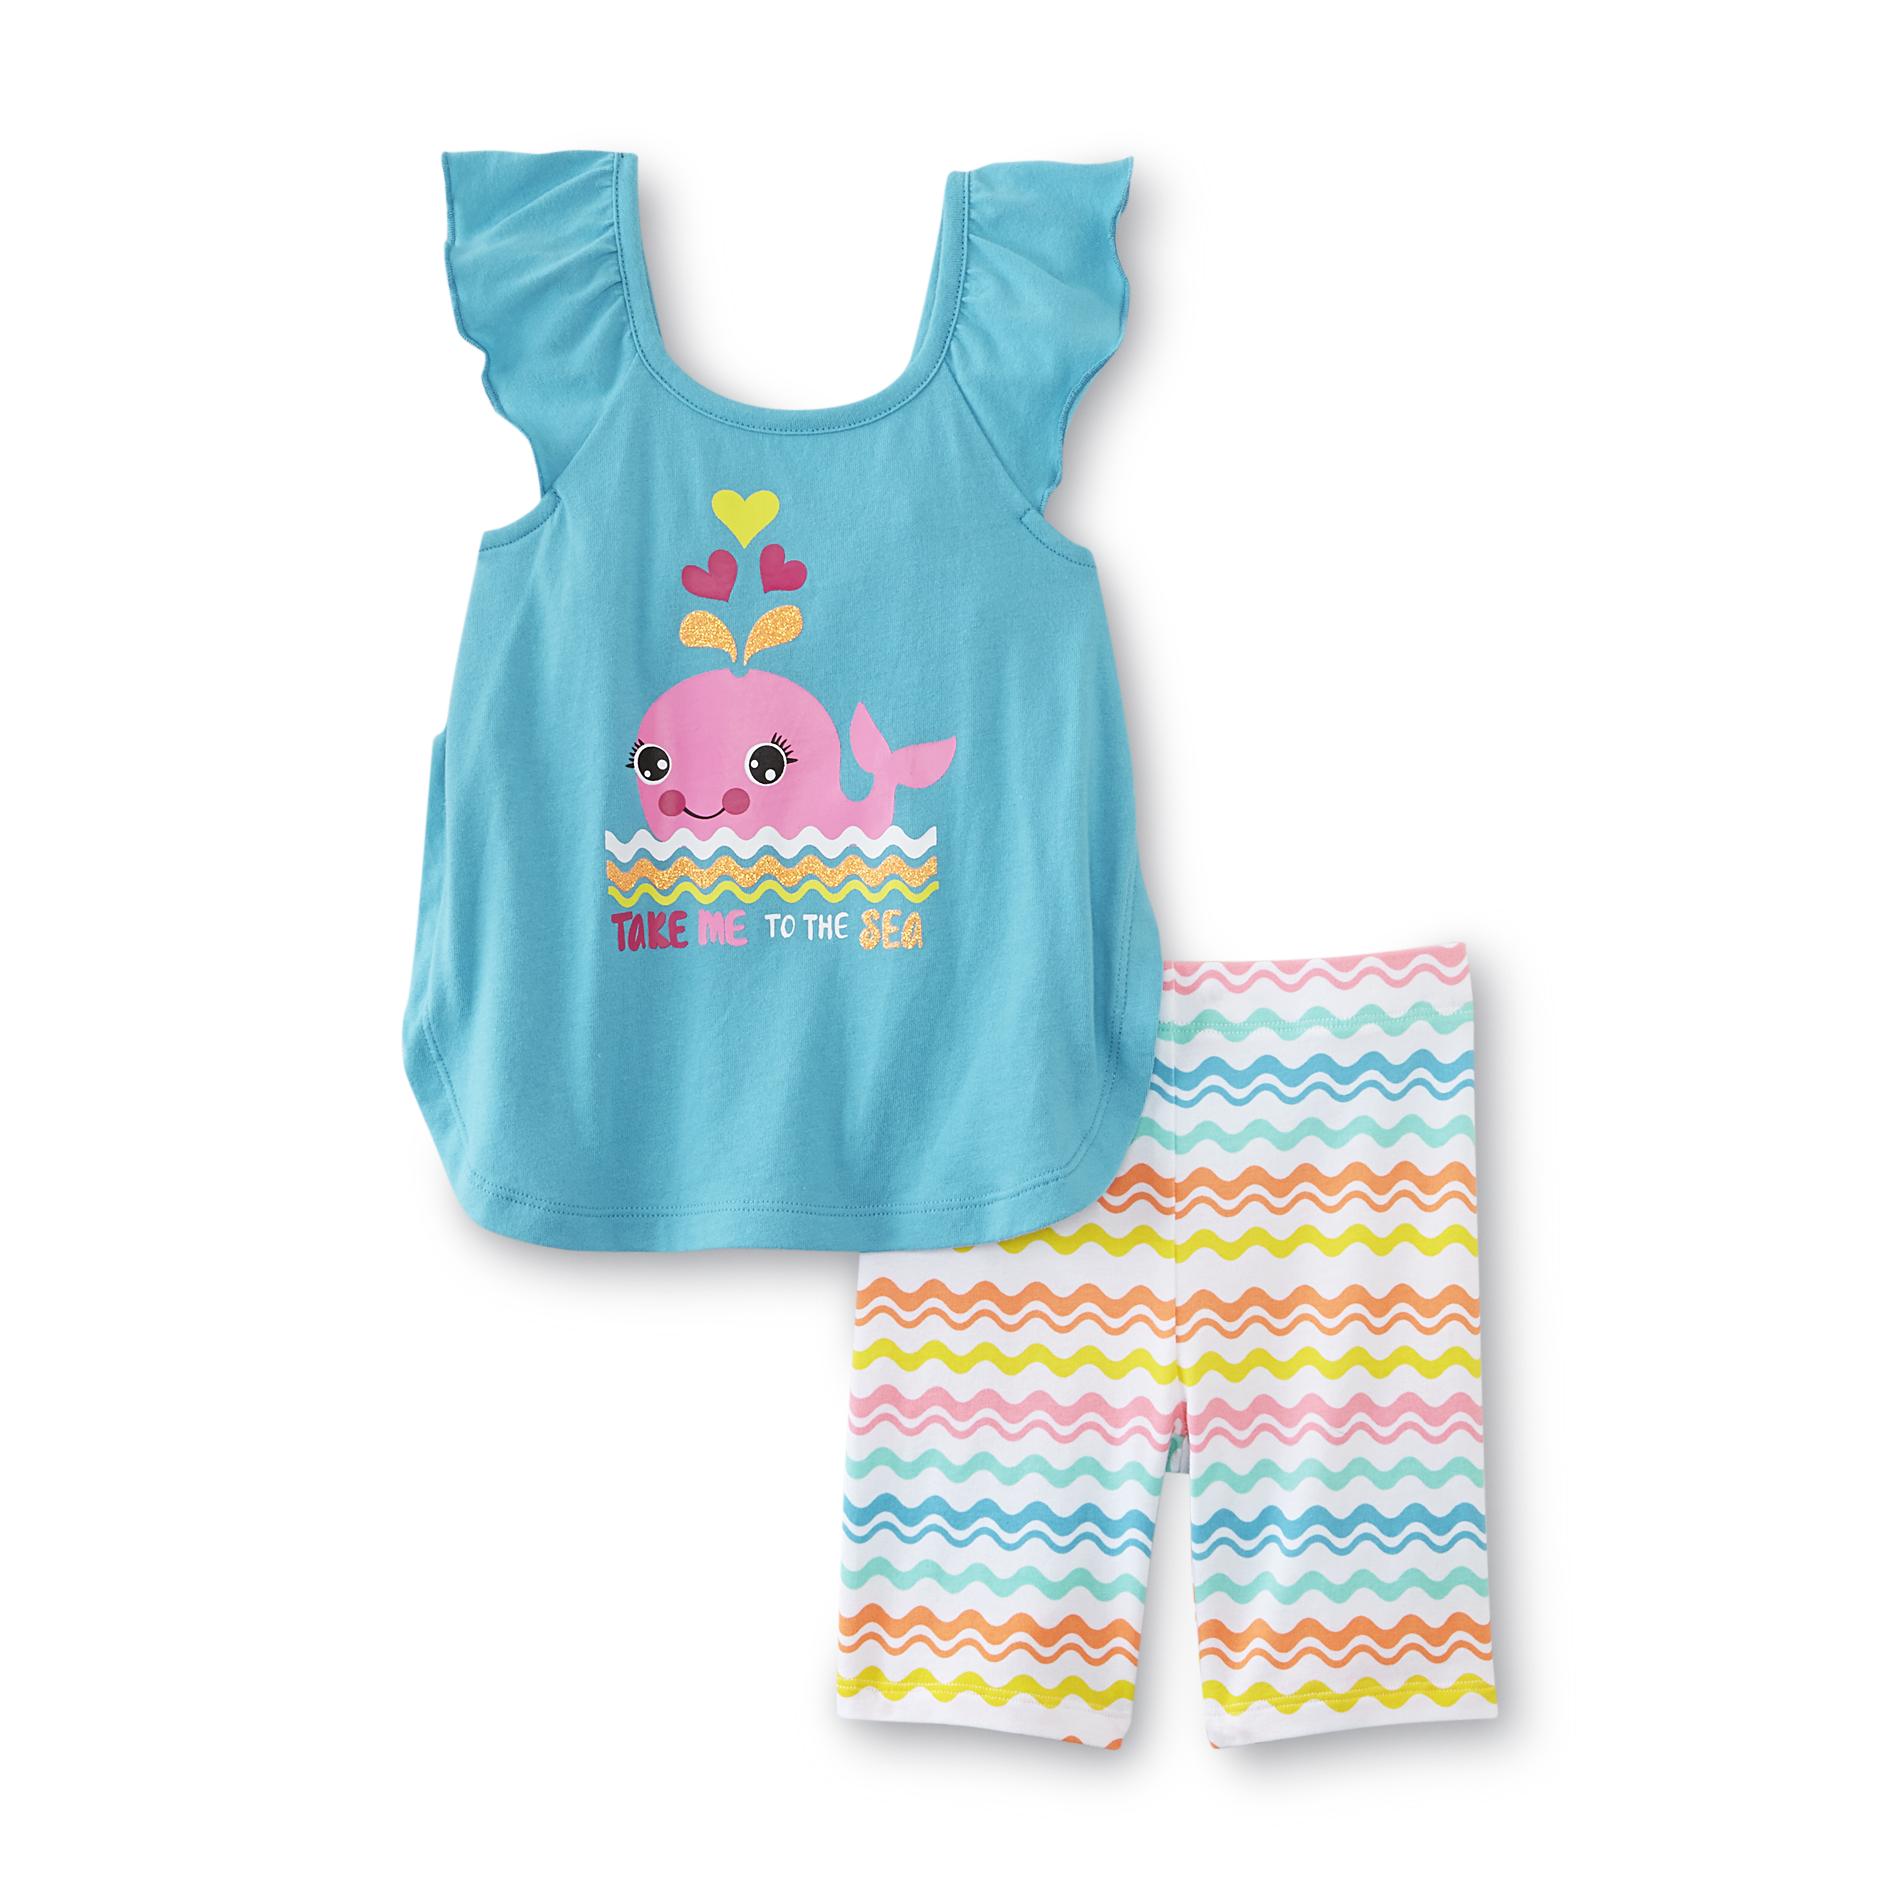 WonderKids Infant & Toddler Girl's Tank Top & Shorts - Whale